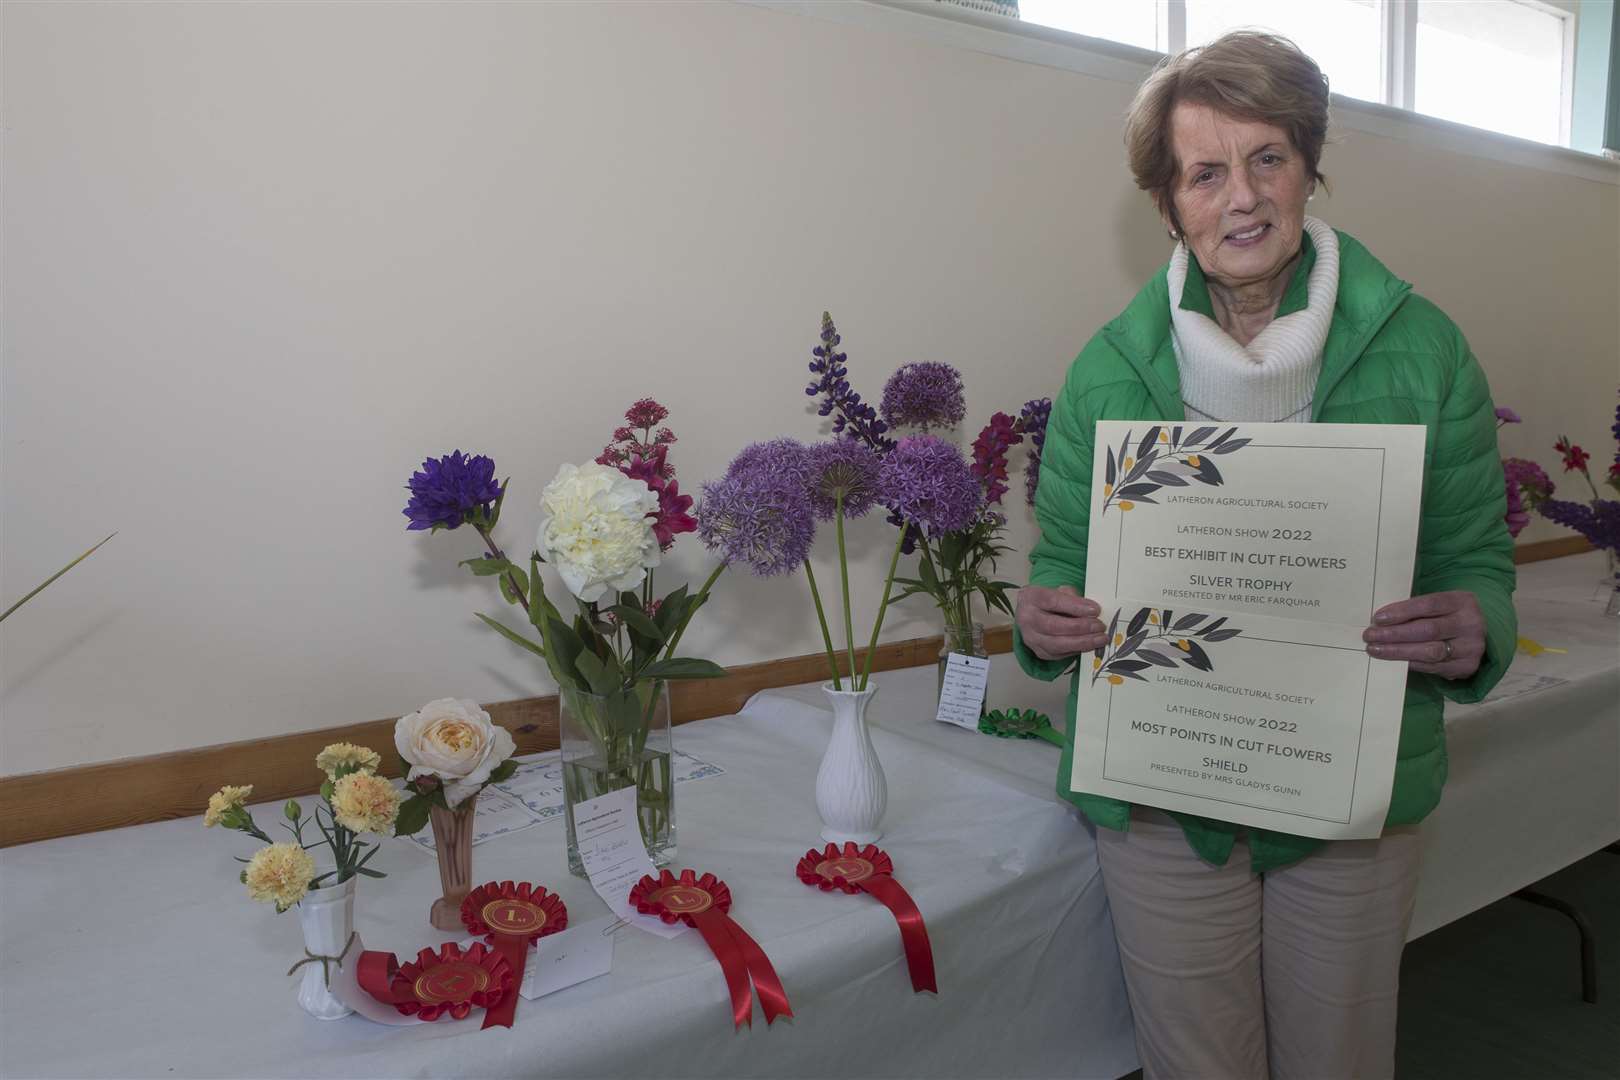 Gladys Gunn, Latheron, with some of her entries that won her the trophies for most points and best exhibit in cut flowers. Picture: Robert MacDonald/Northern Studios